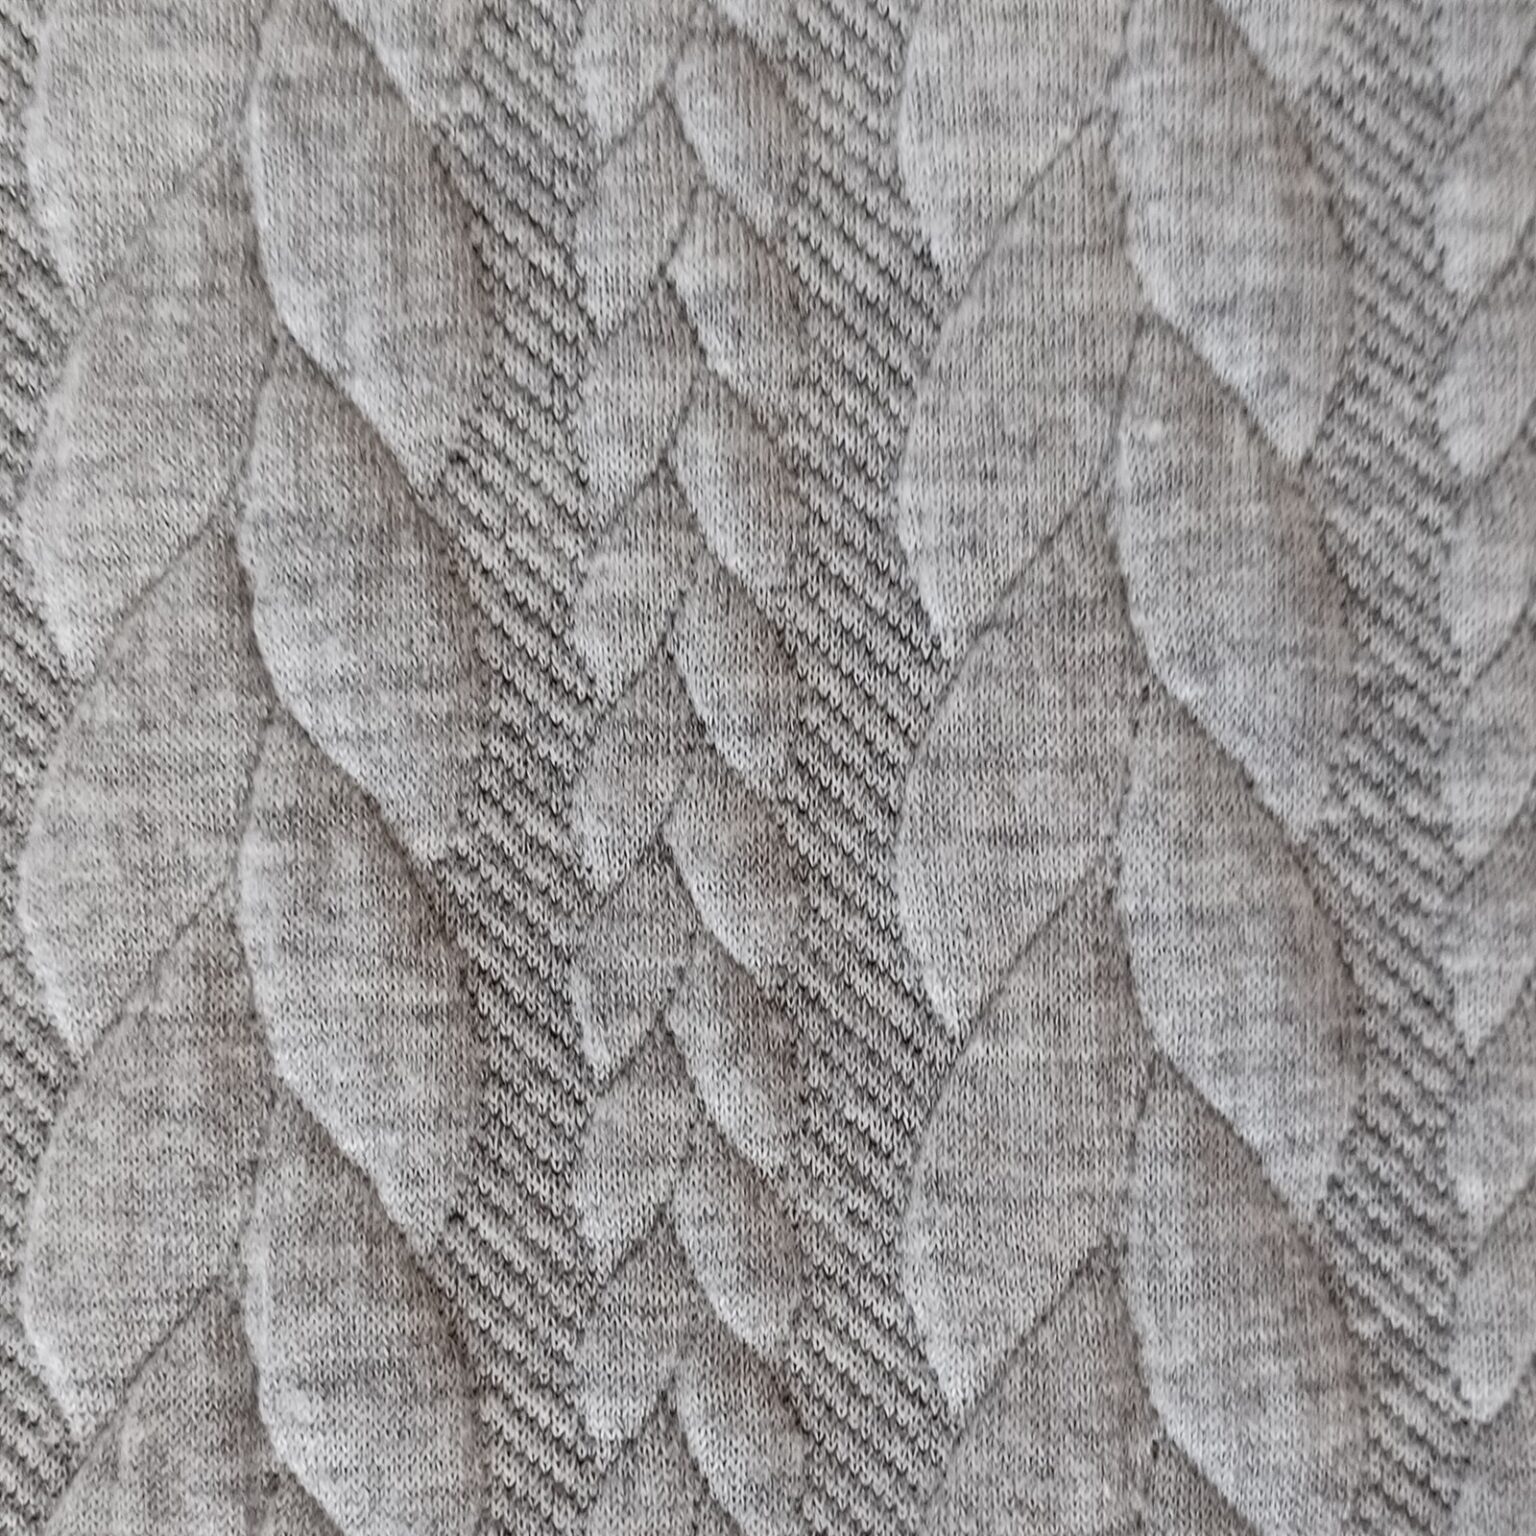 Cable Knit Jersey Fabric - Grey - 150cm Wide